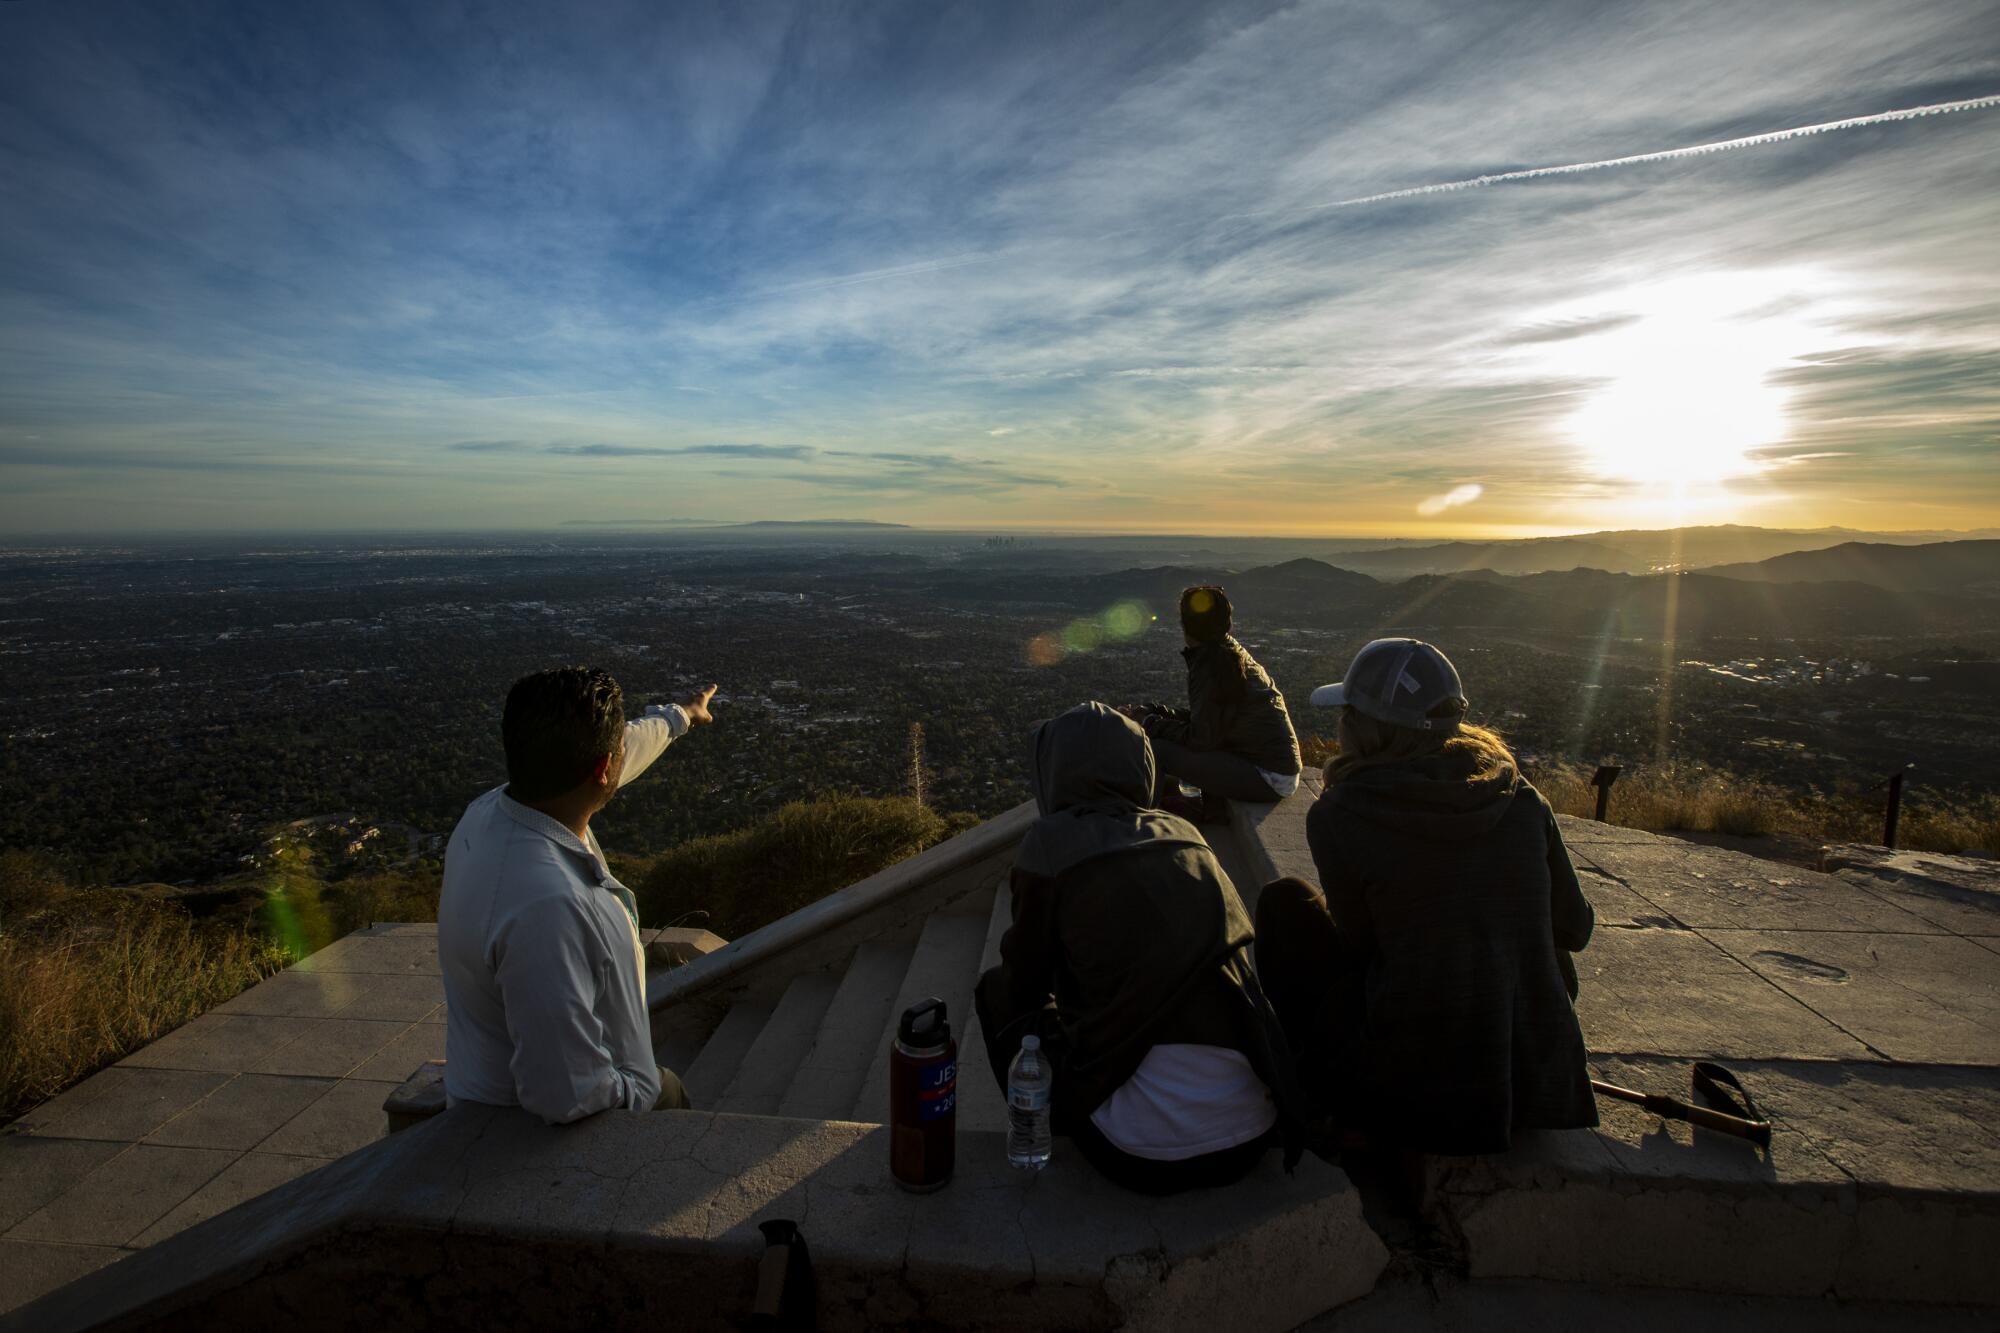 Hikers take in the sunset from the steps of an old hotel atop Echo Mountain.